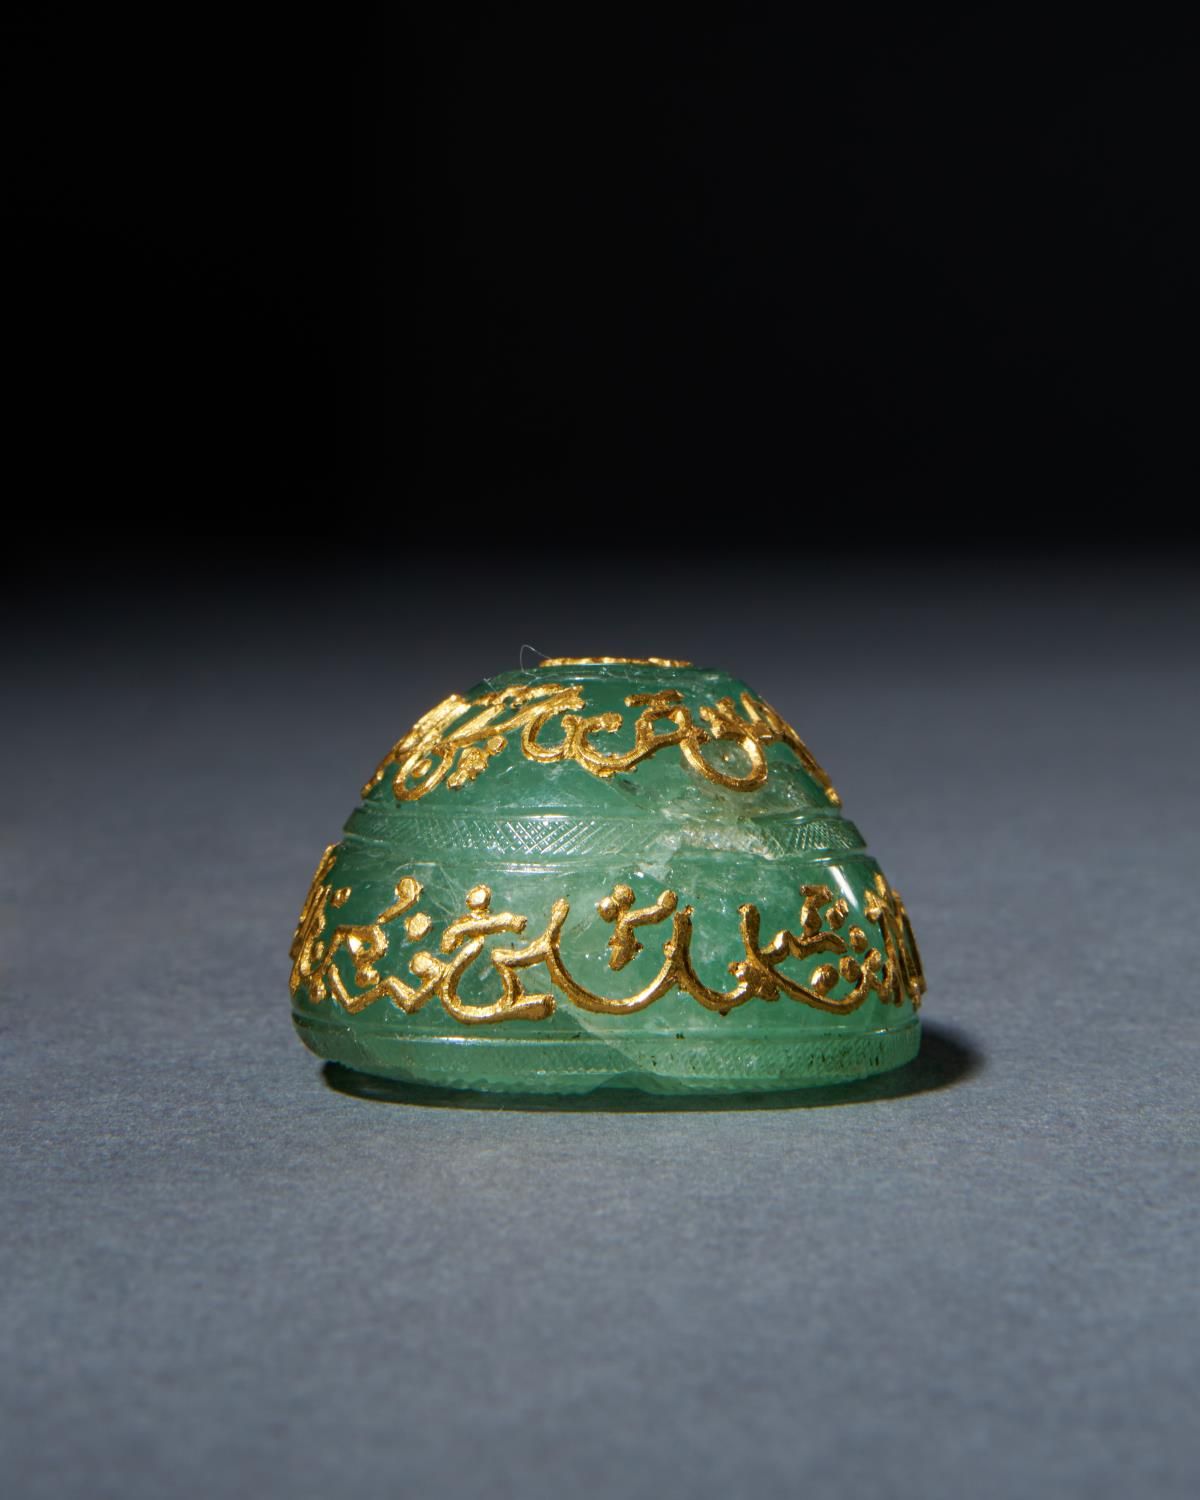 A LARGE MUGHAL EMERALD WITH GOLD INSCRIPTION, 18TH CENTURY, INDIA GRANDE ÉMERAUD&hellip;